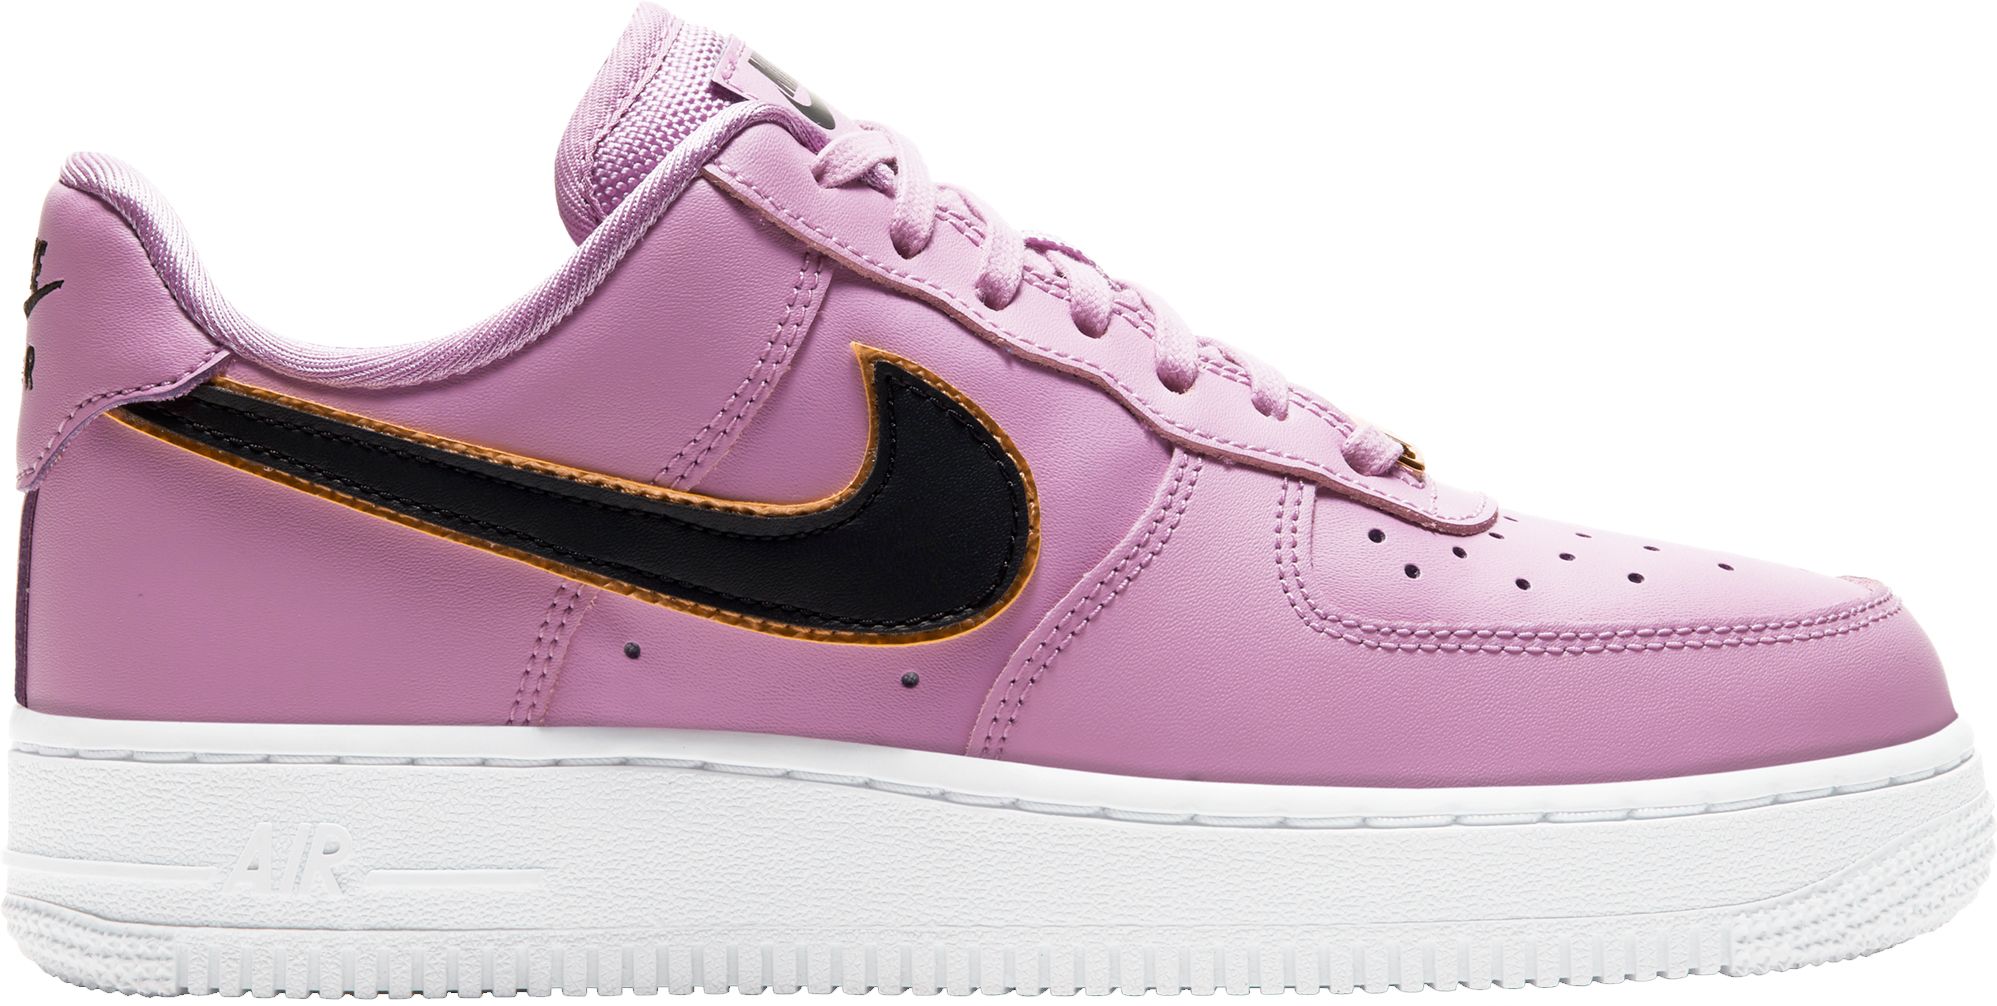 nike air force 1 womens black and pink